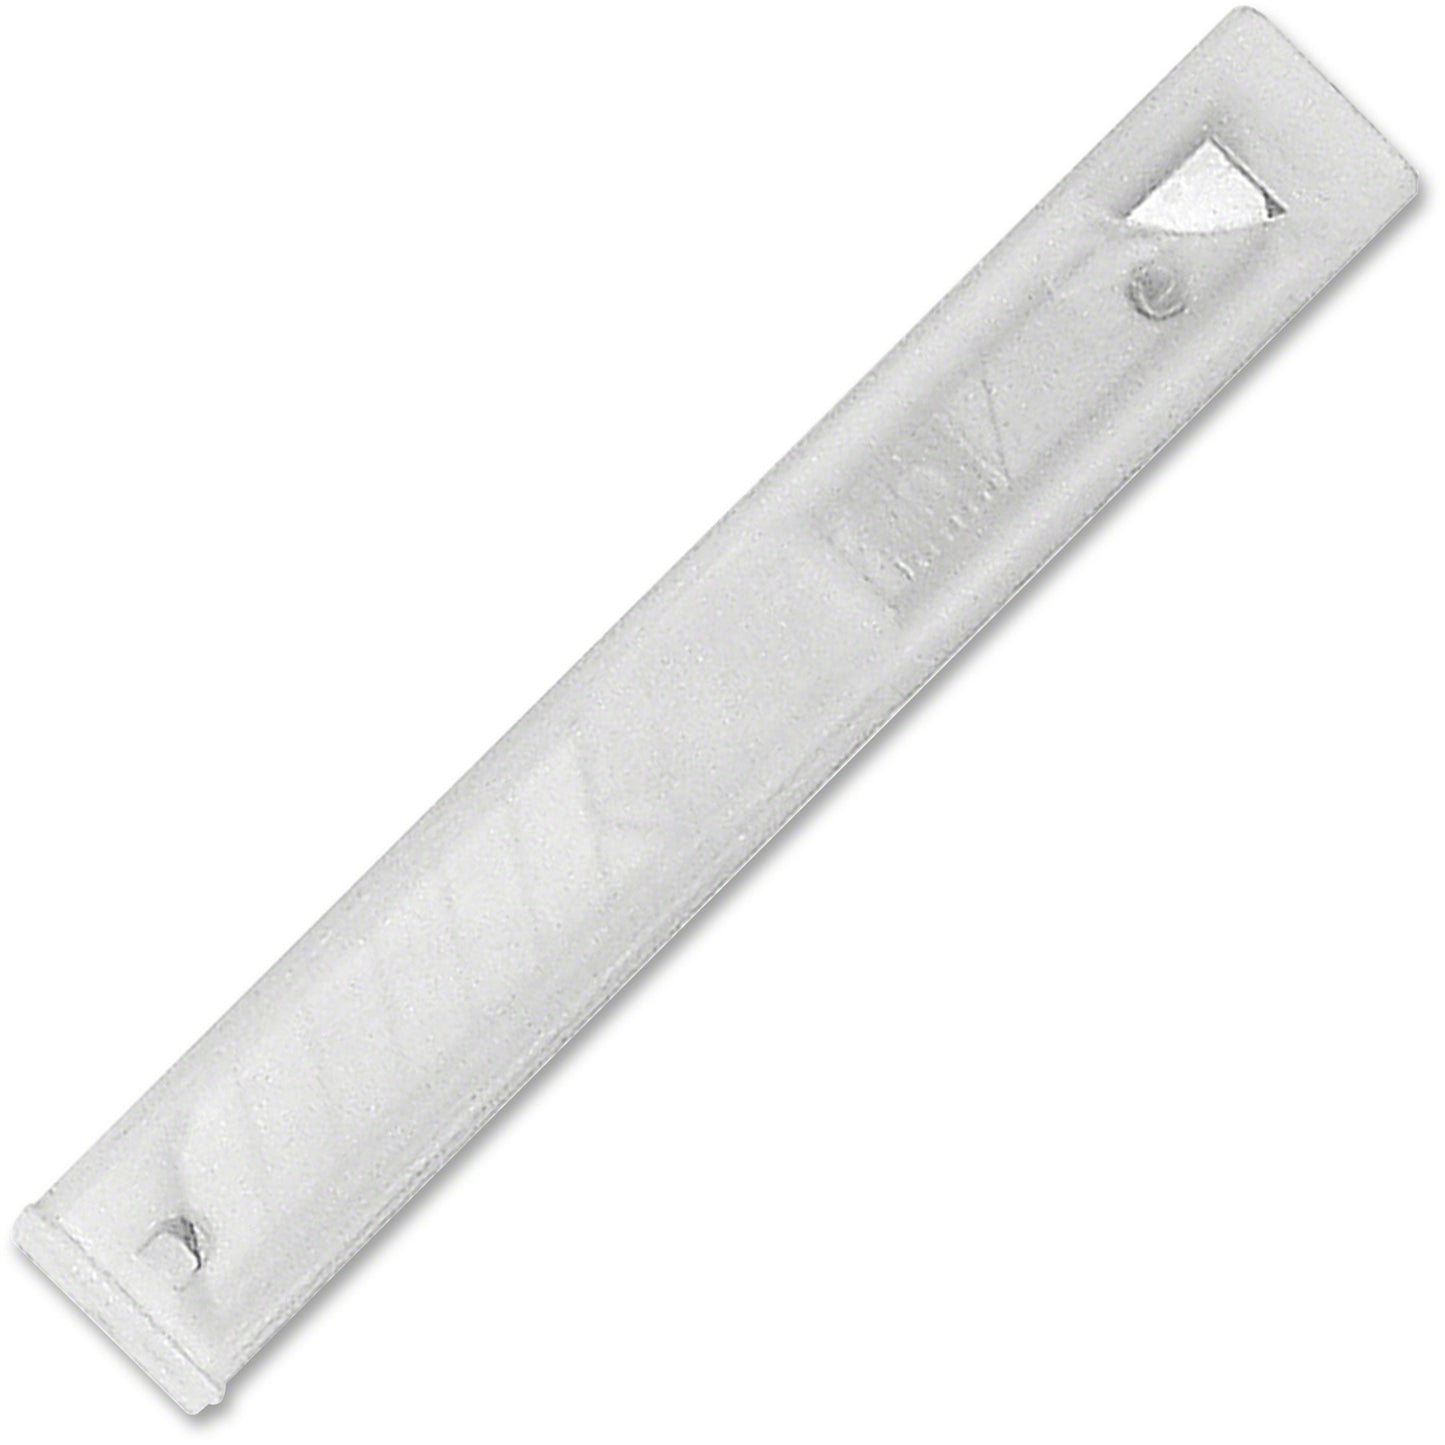 Acme United Snap Blade Knife Replacement Blades